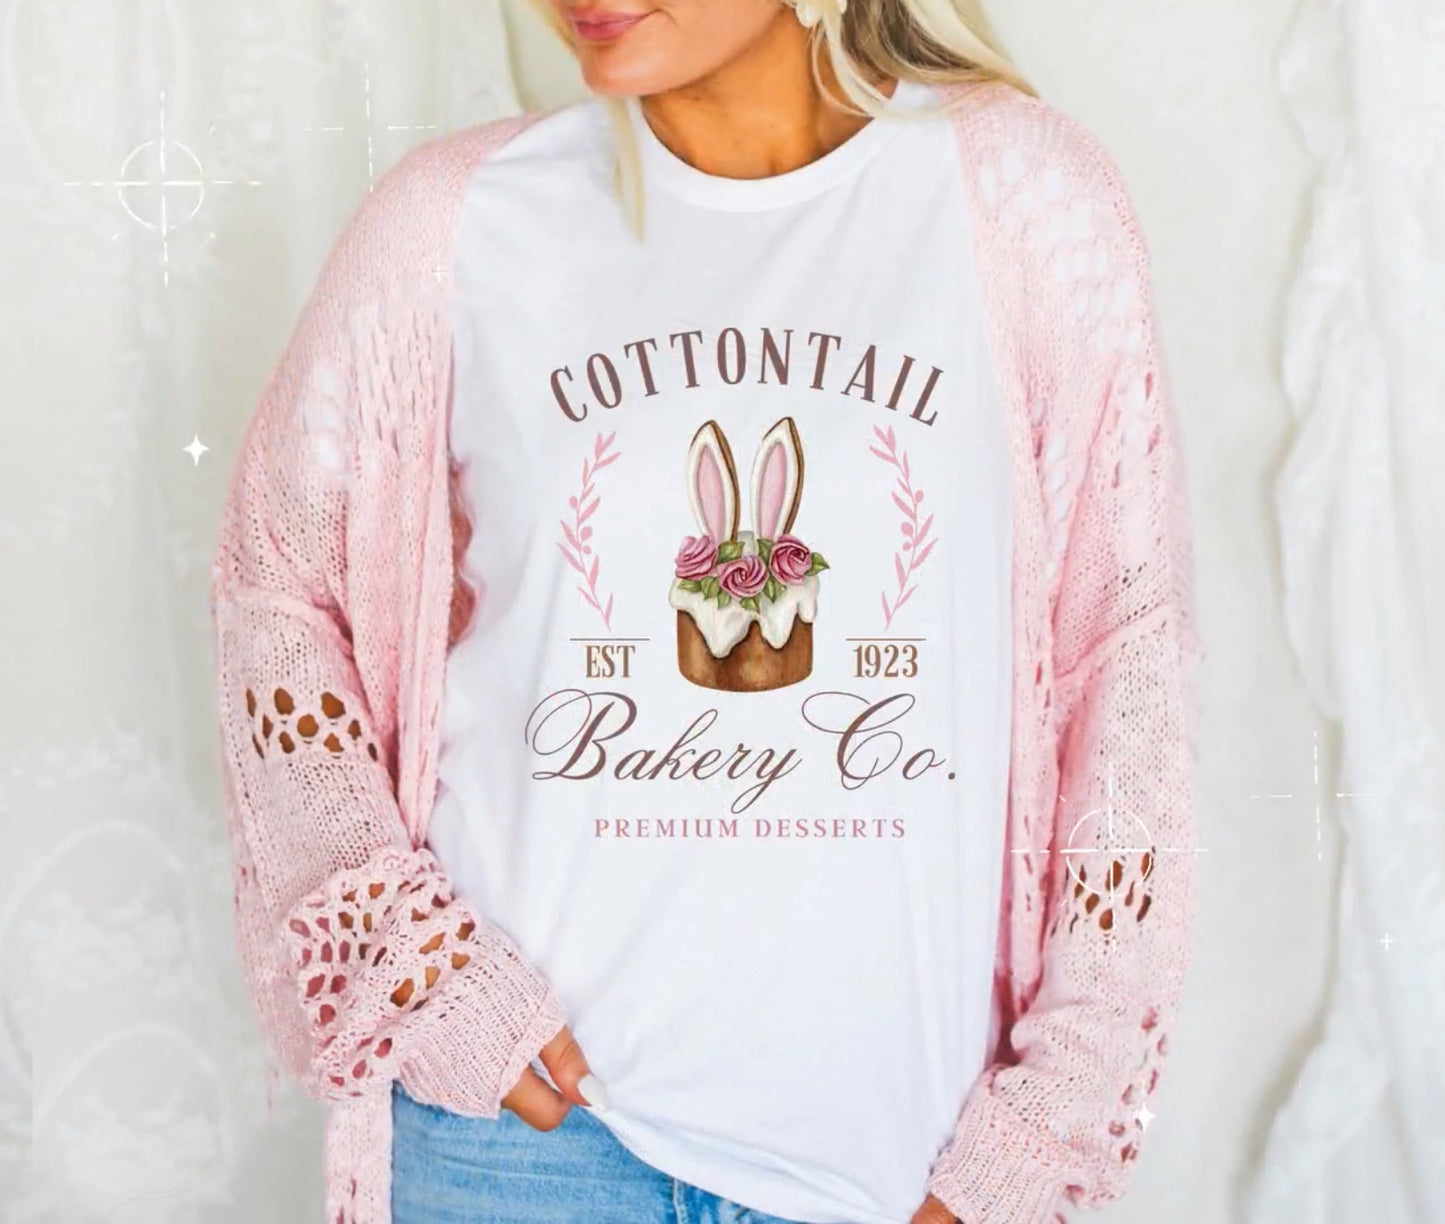 Cottontail Bakery Top